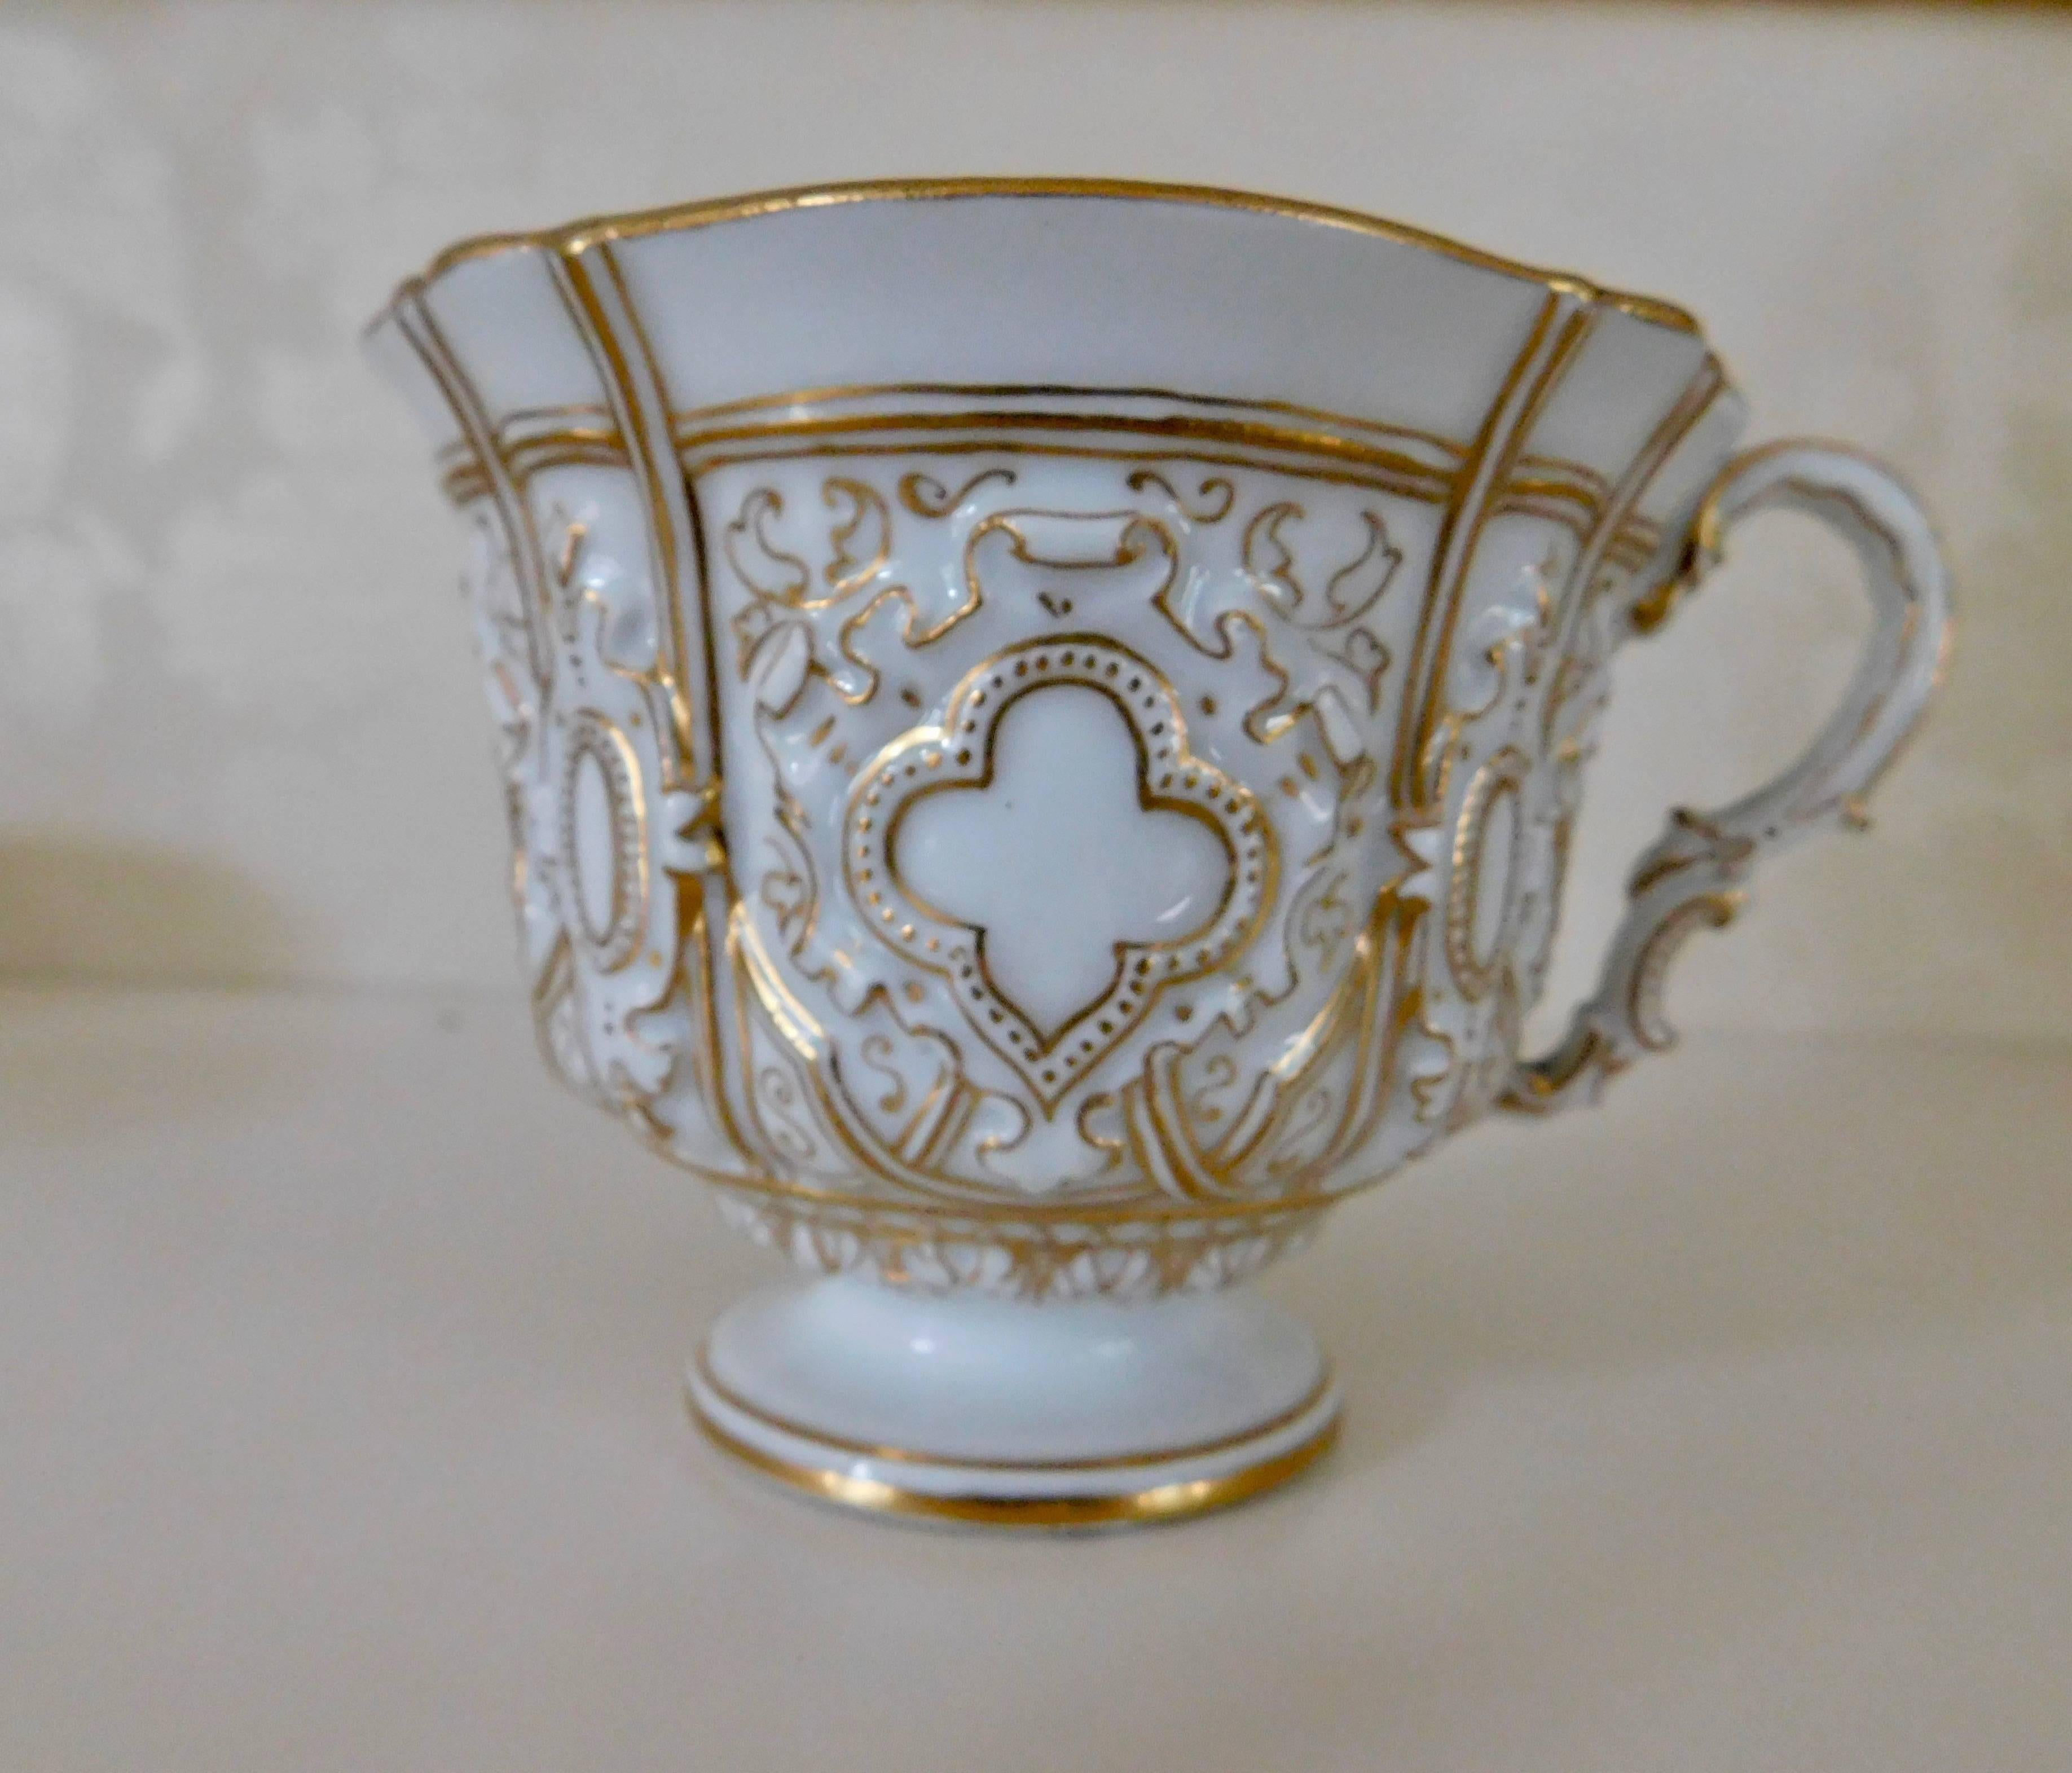 Gilt Early 20th Century Meissen Porcelain Heavy Gold Trim Embossed Cup and Saucer